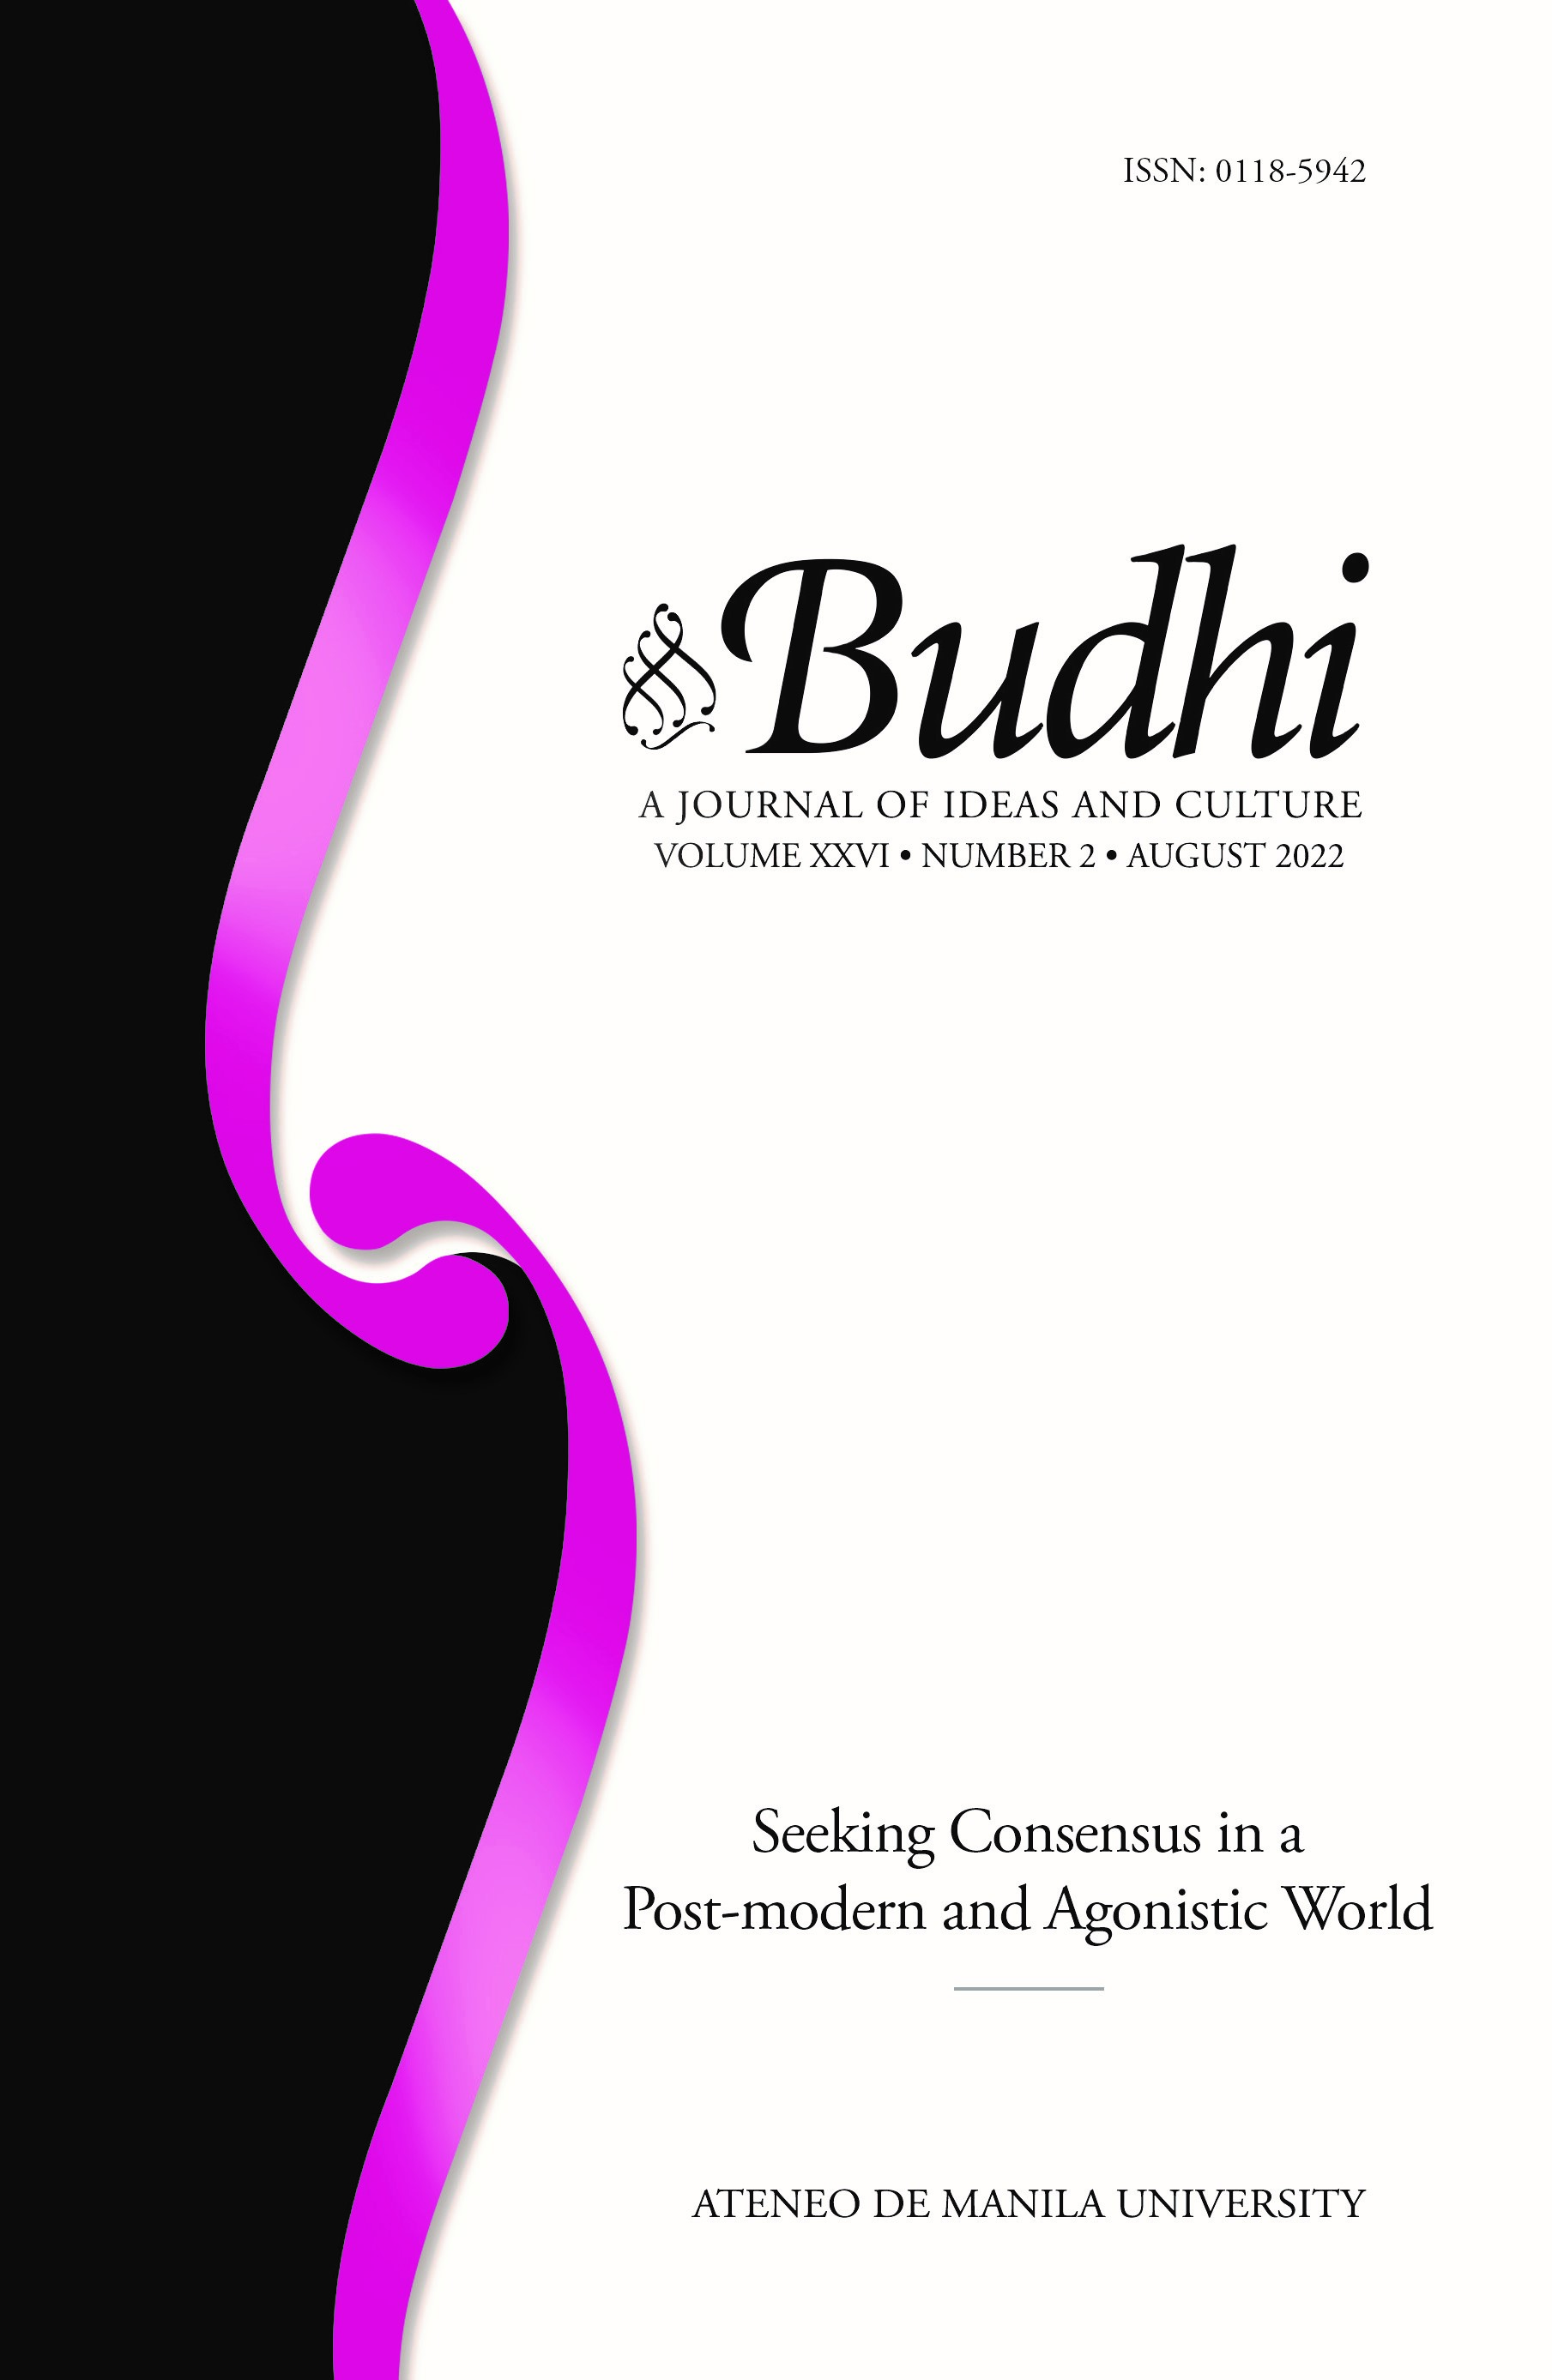 Budhi: A Journal of Ideas and Culture Image